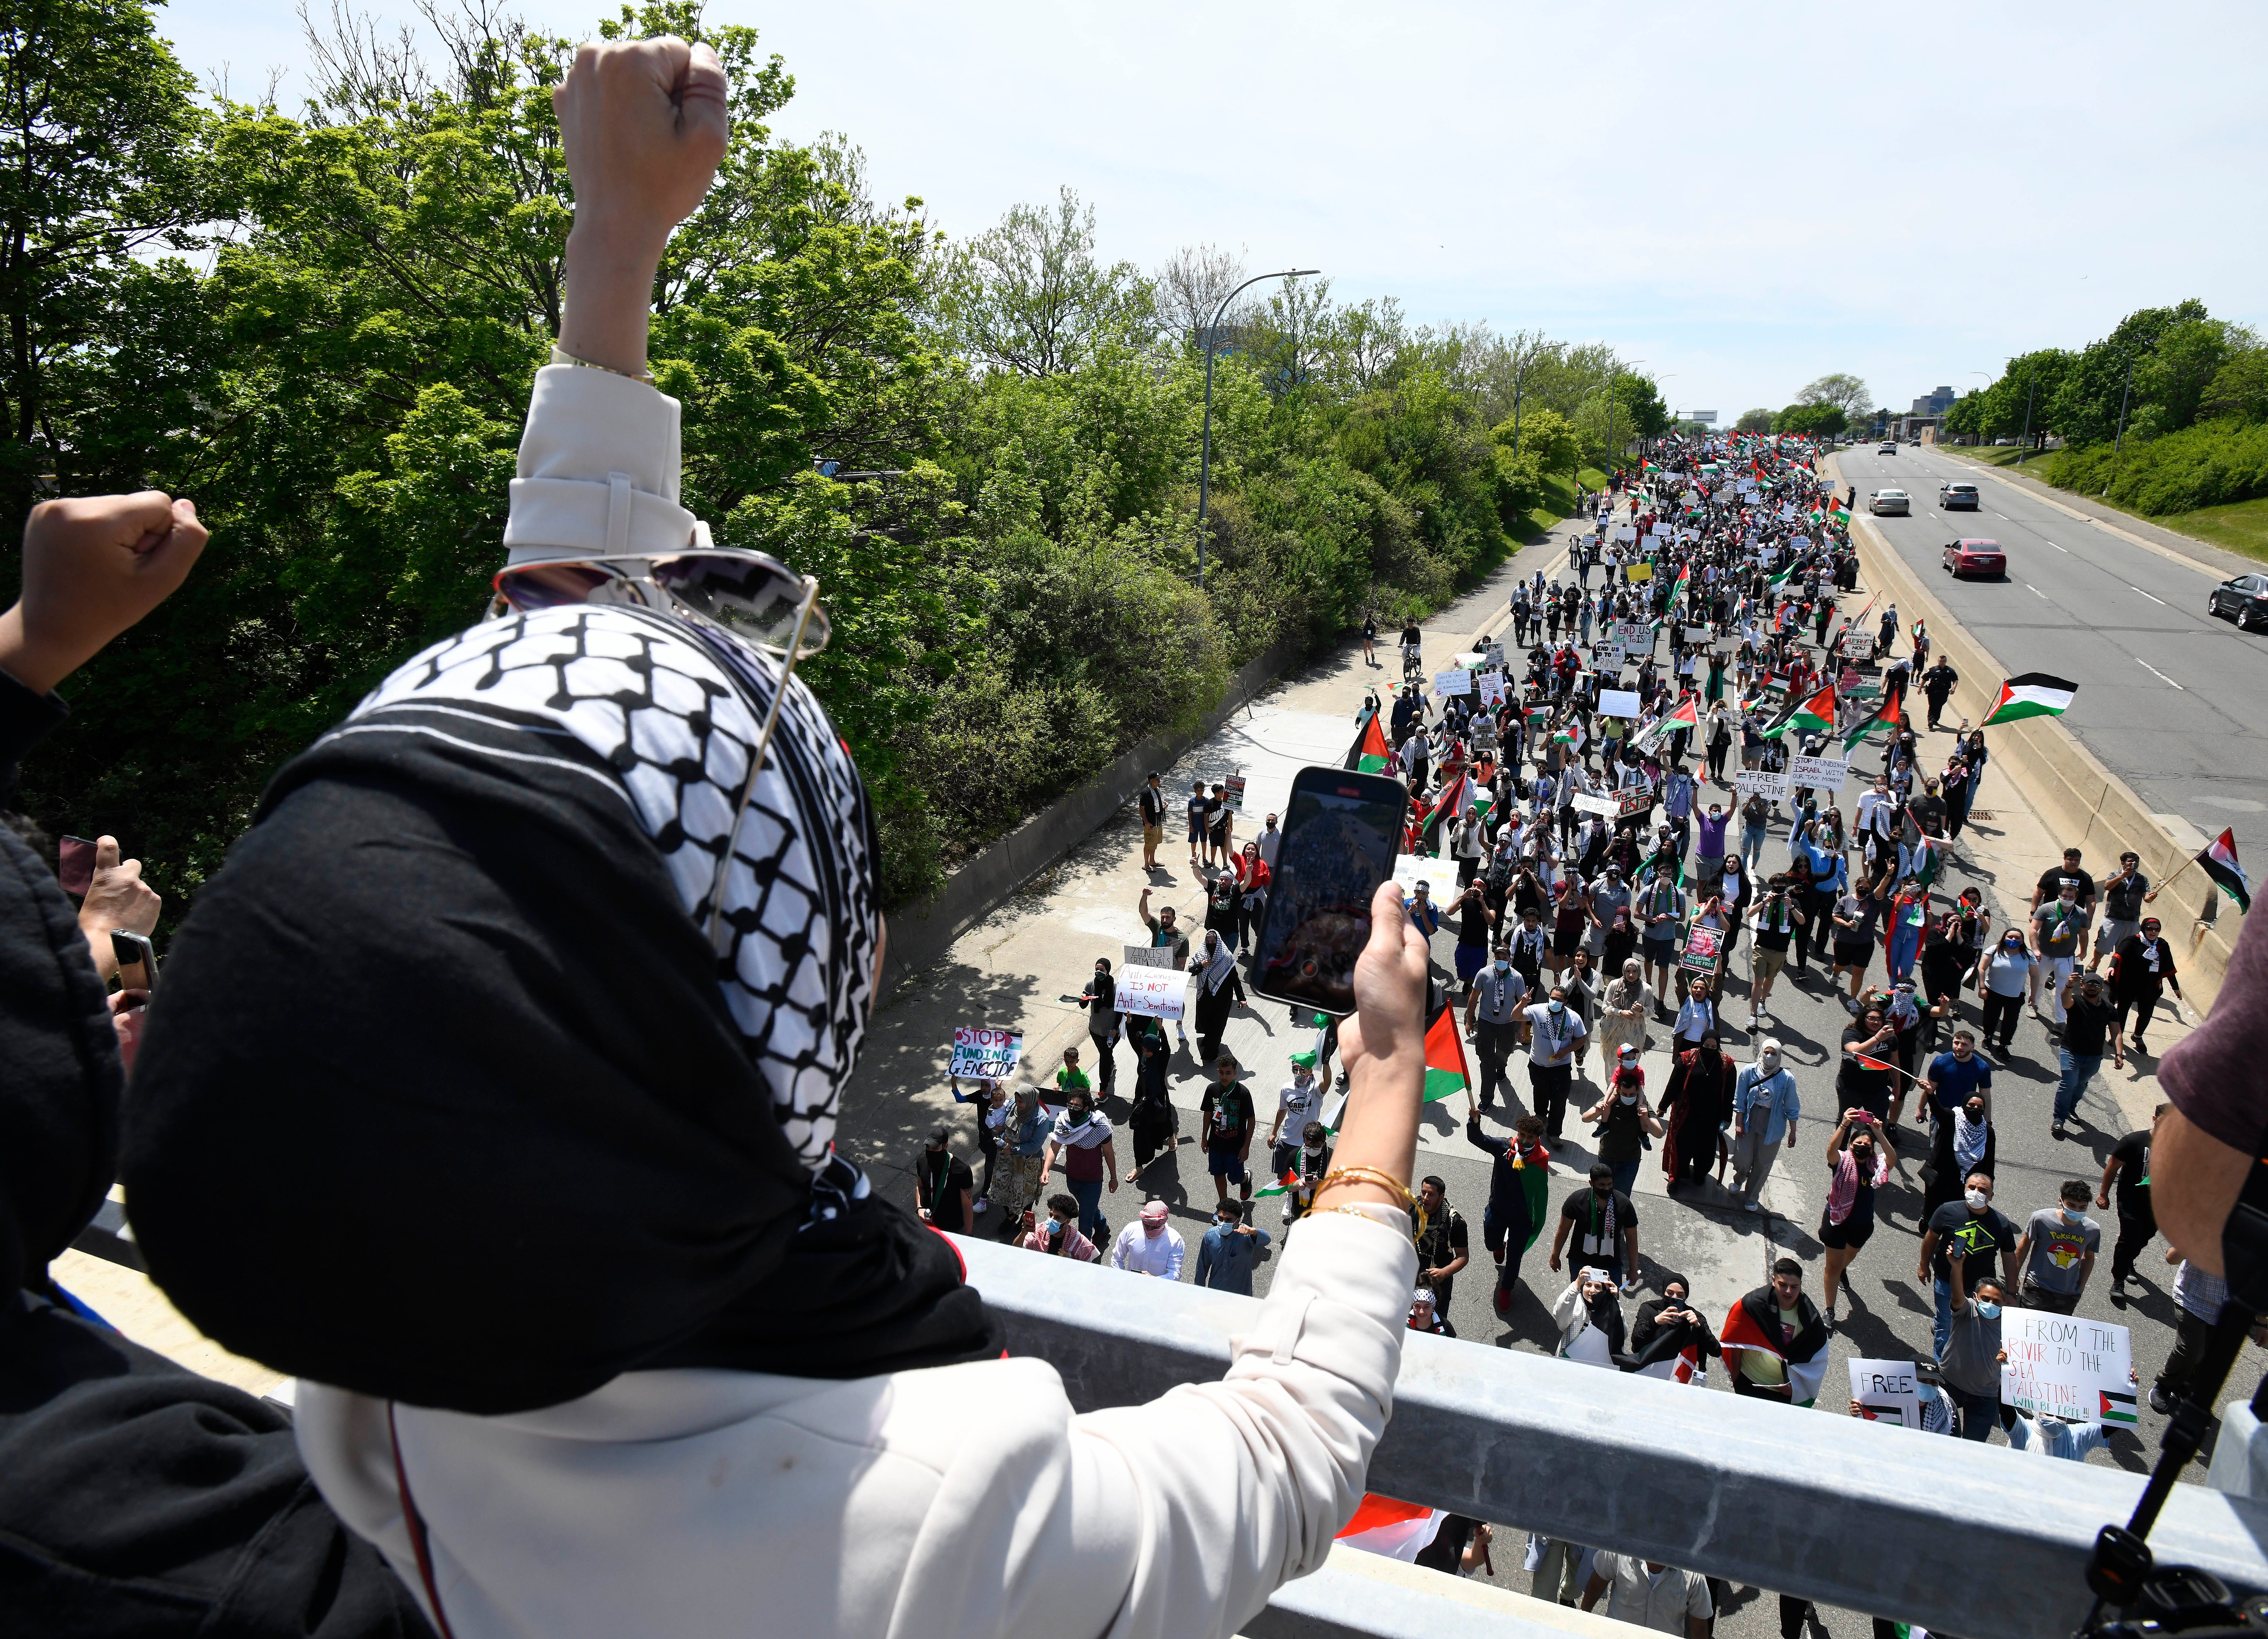 Ola Ali raises her fist in support as thousands of Palestinian supporters march down eastbound Michigan Avenue during a Palestinian protest and march, at the same time President Joe Biden is visiting in another part of Dearborn, Michigan on May 18, 2021.